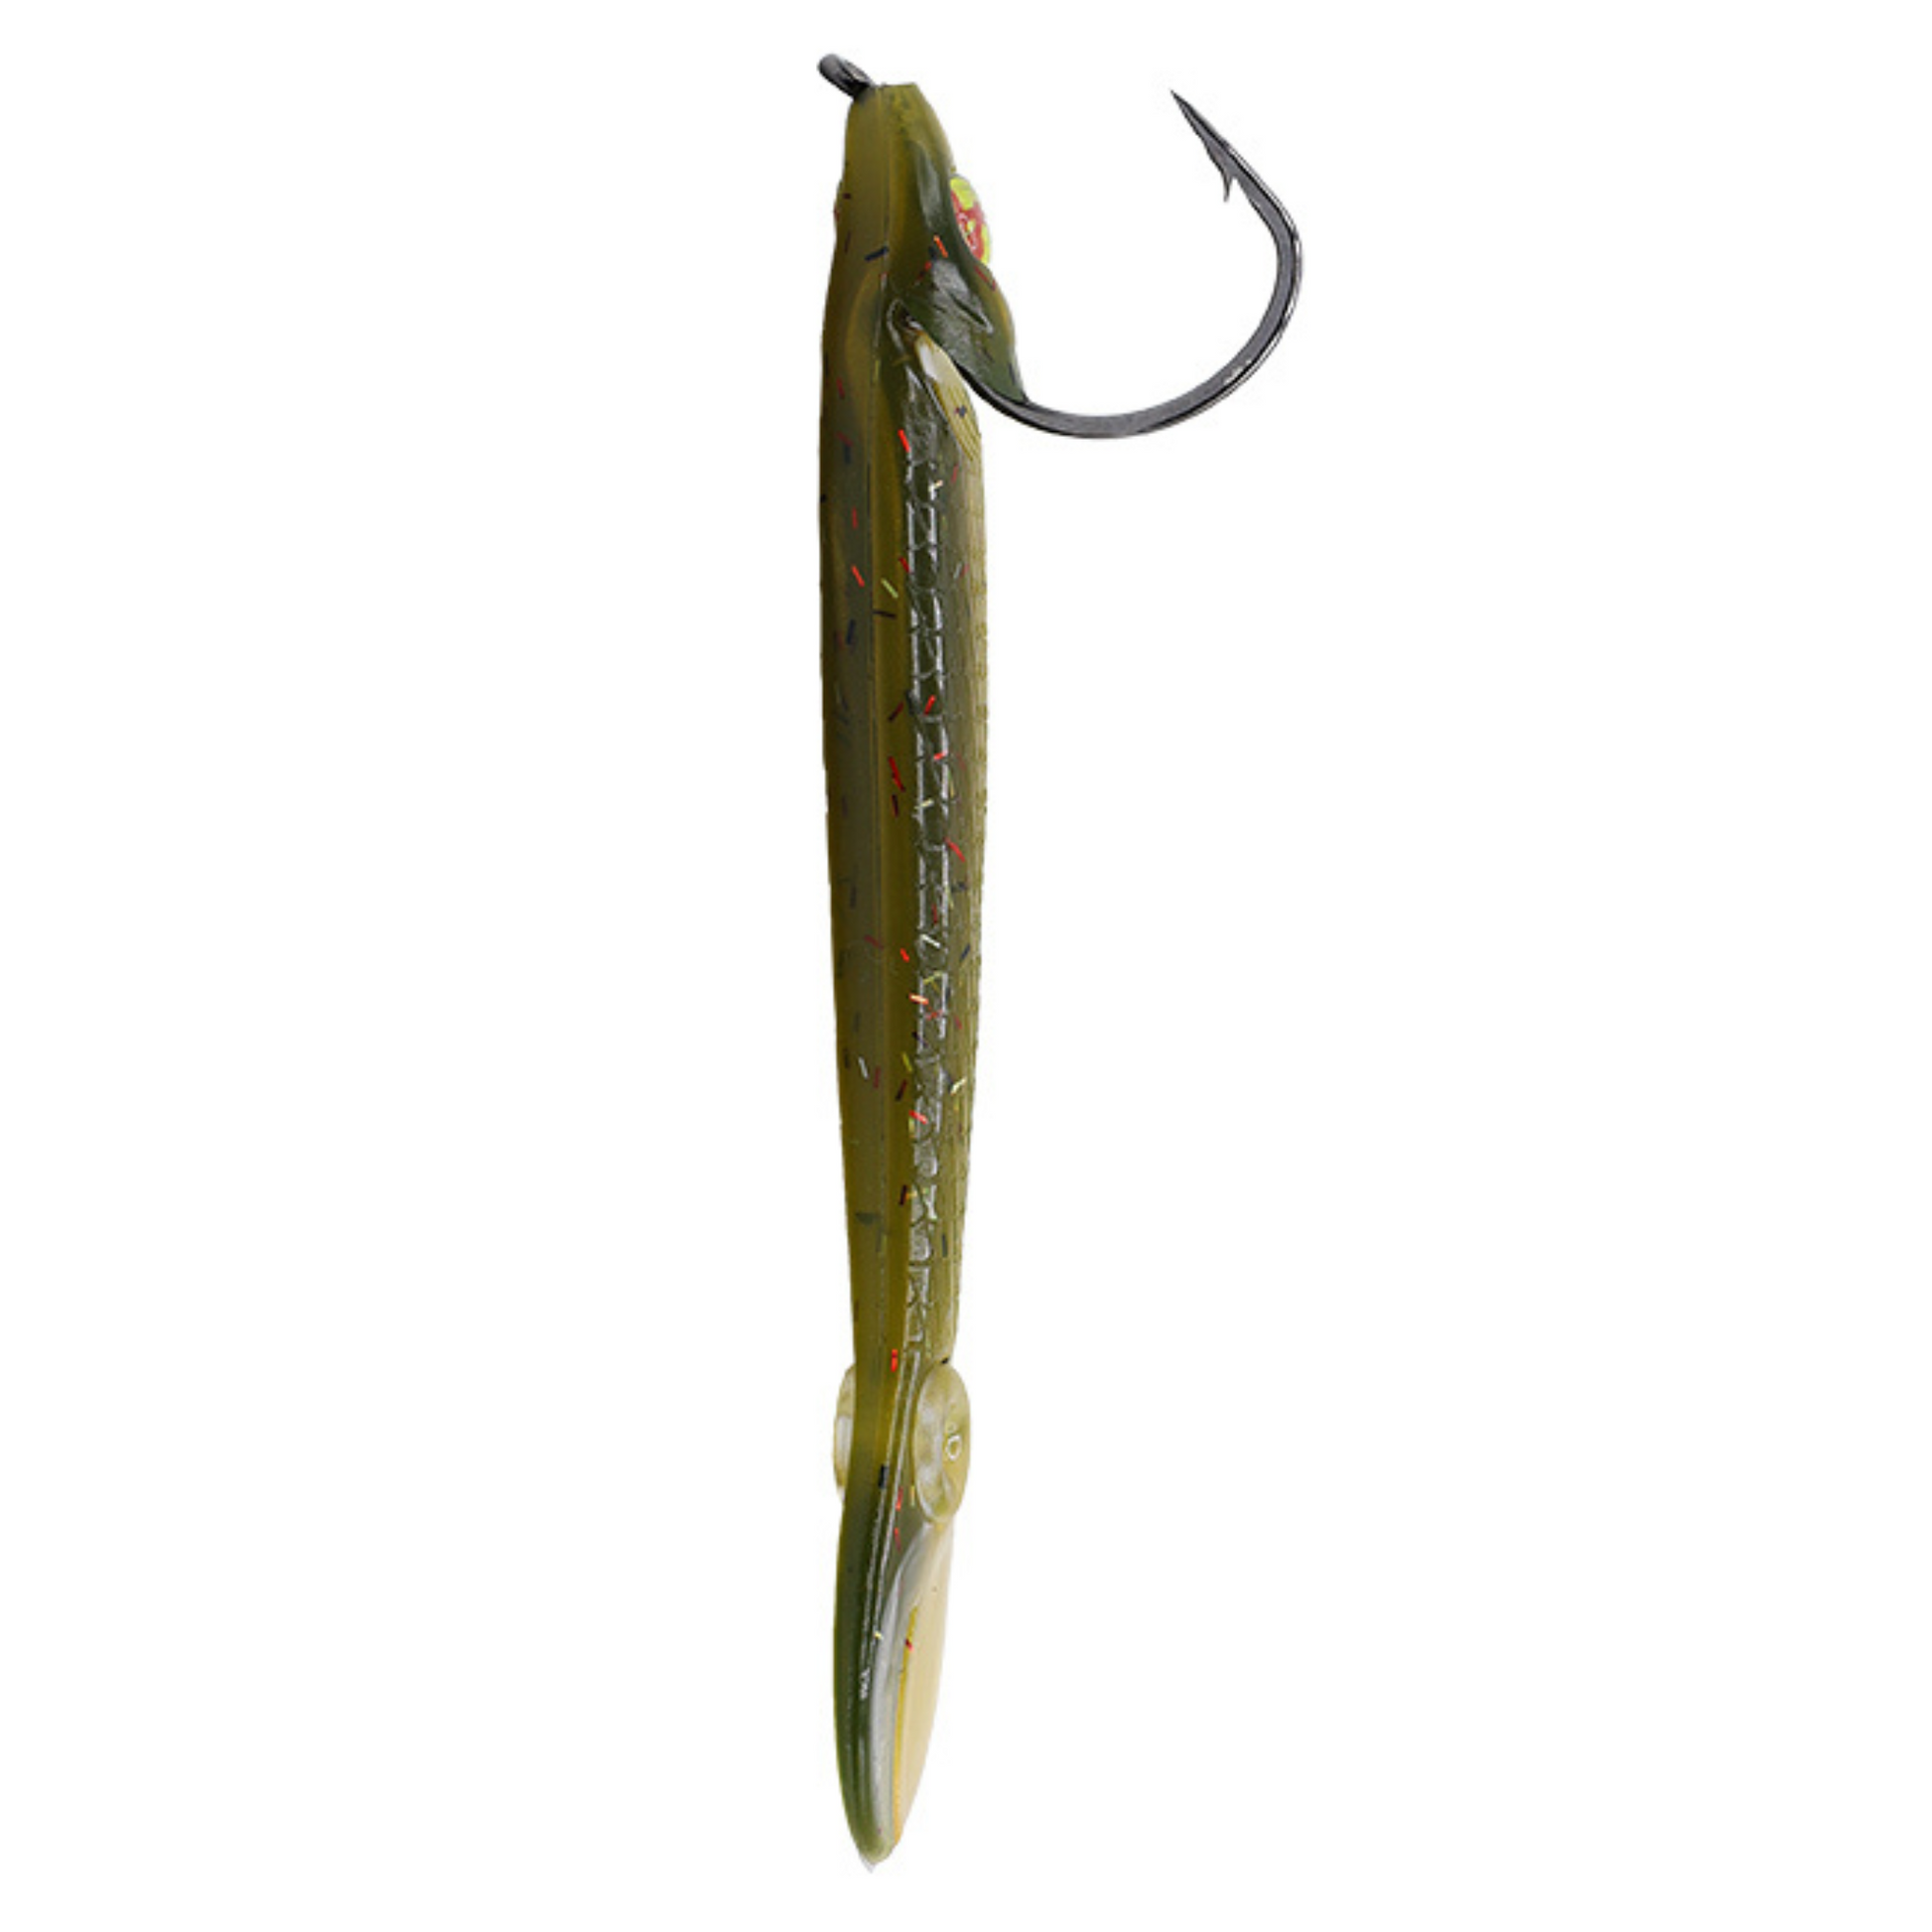 3.25 5pc. Recoil Baits - Ladrón – Lawless Lures